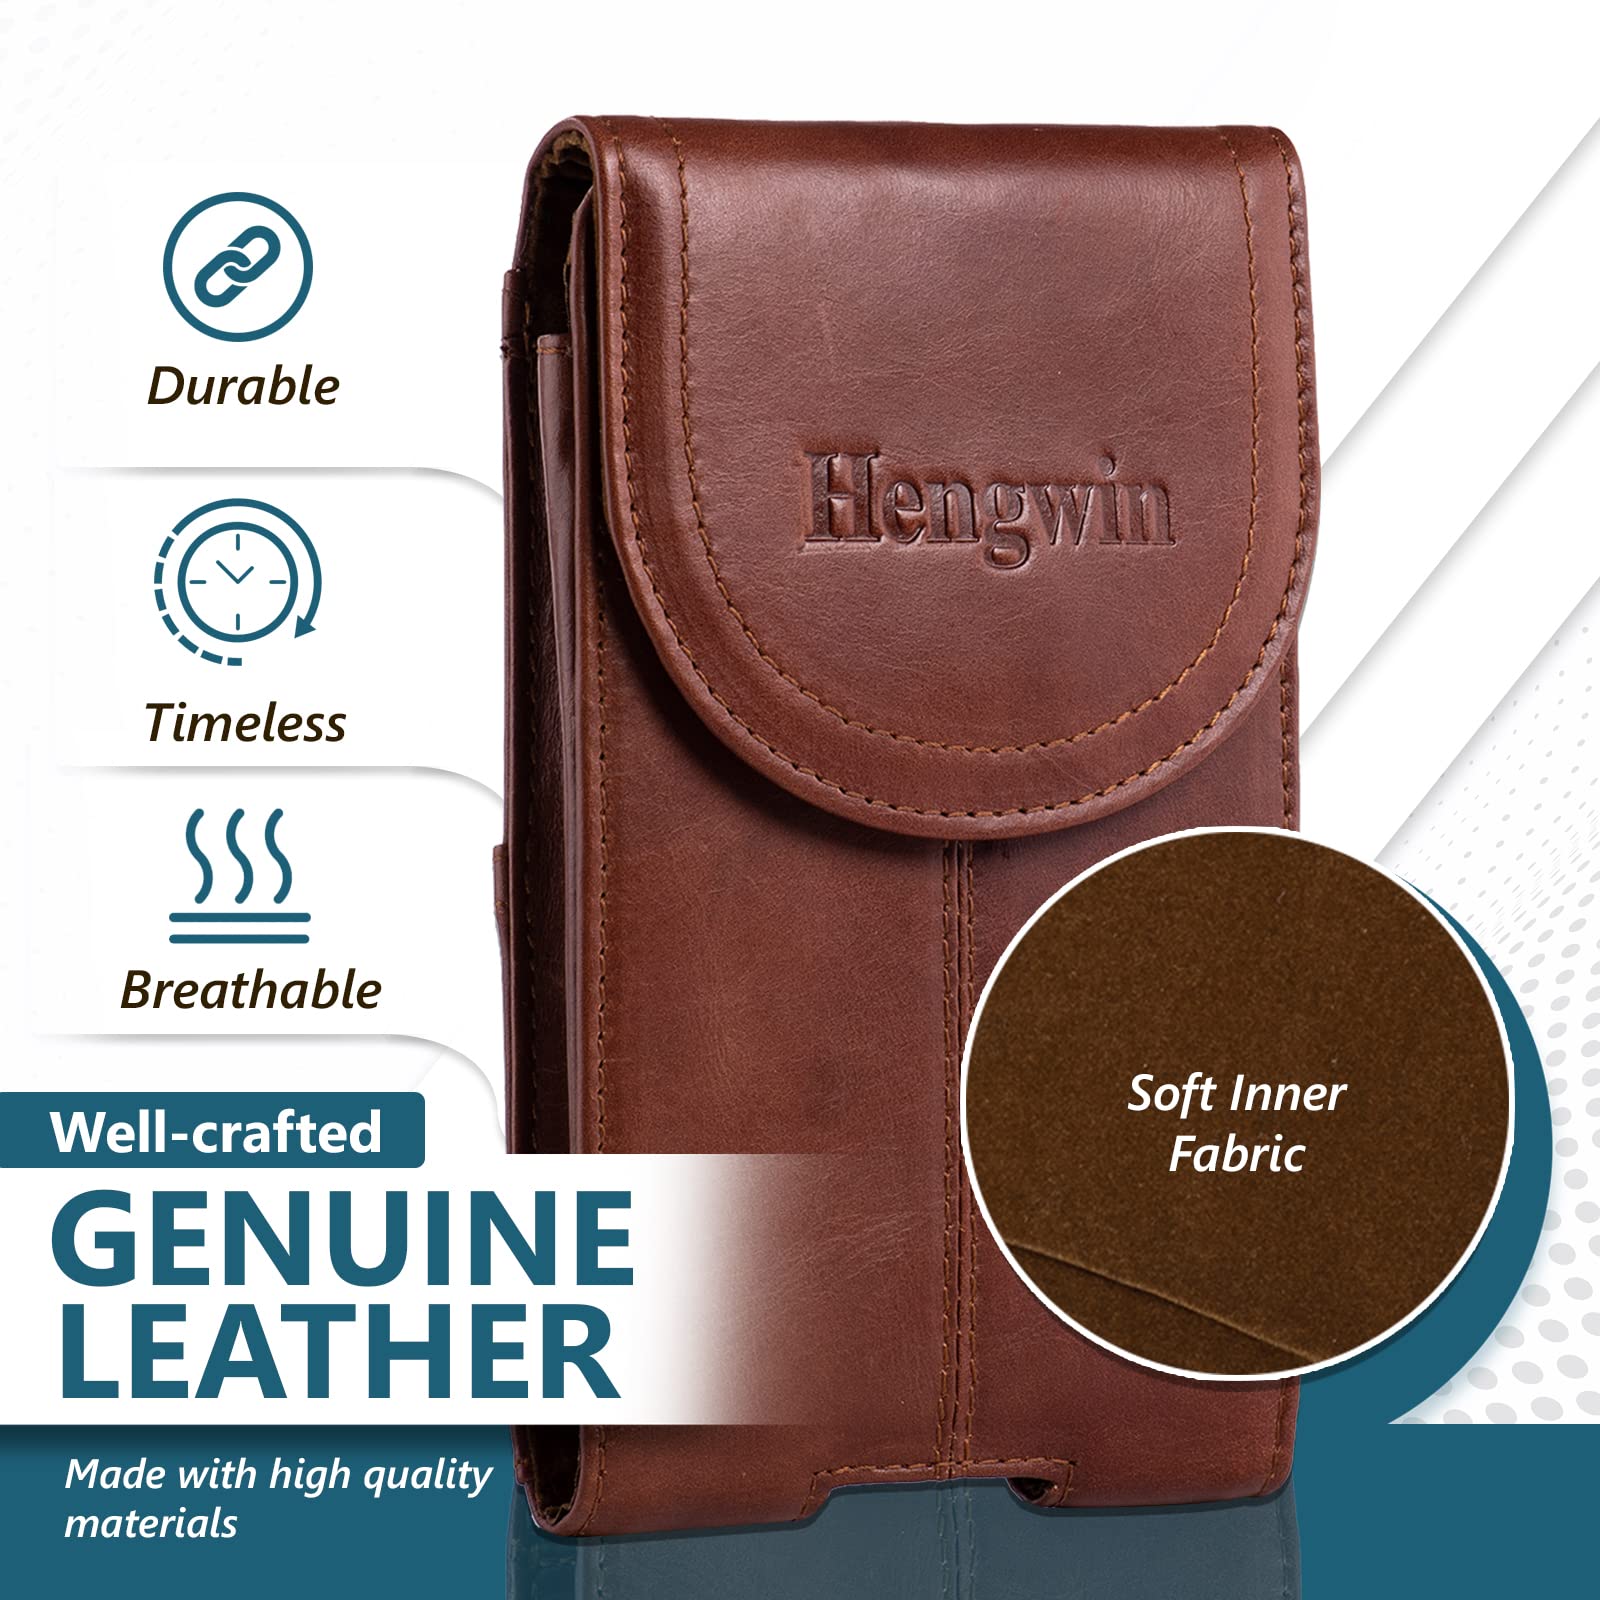 Hengwin Genuine Leather Phone Holster for iPhone 14 Pro Max Samsung Galaxy S22 Ultra S23 Ultra Note 20 Ultra A13 A42 A12 Belt Case with Belt Clip Loop Holder Pouch for 6.2-6.58 inches Phones (Brown)